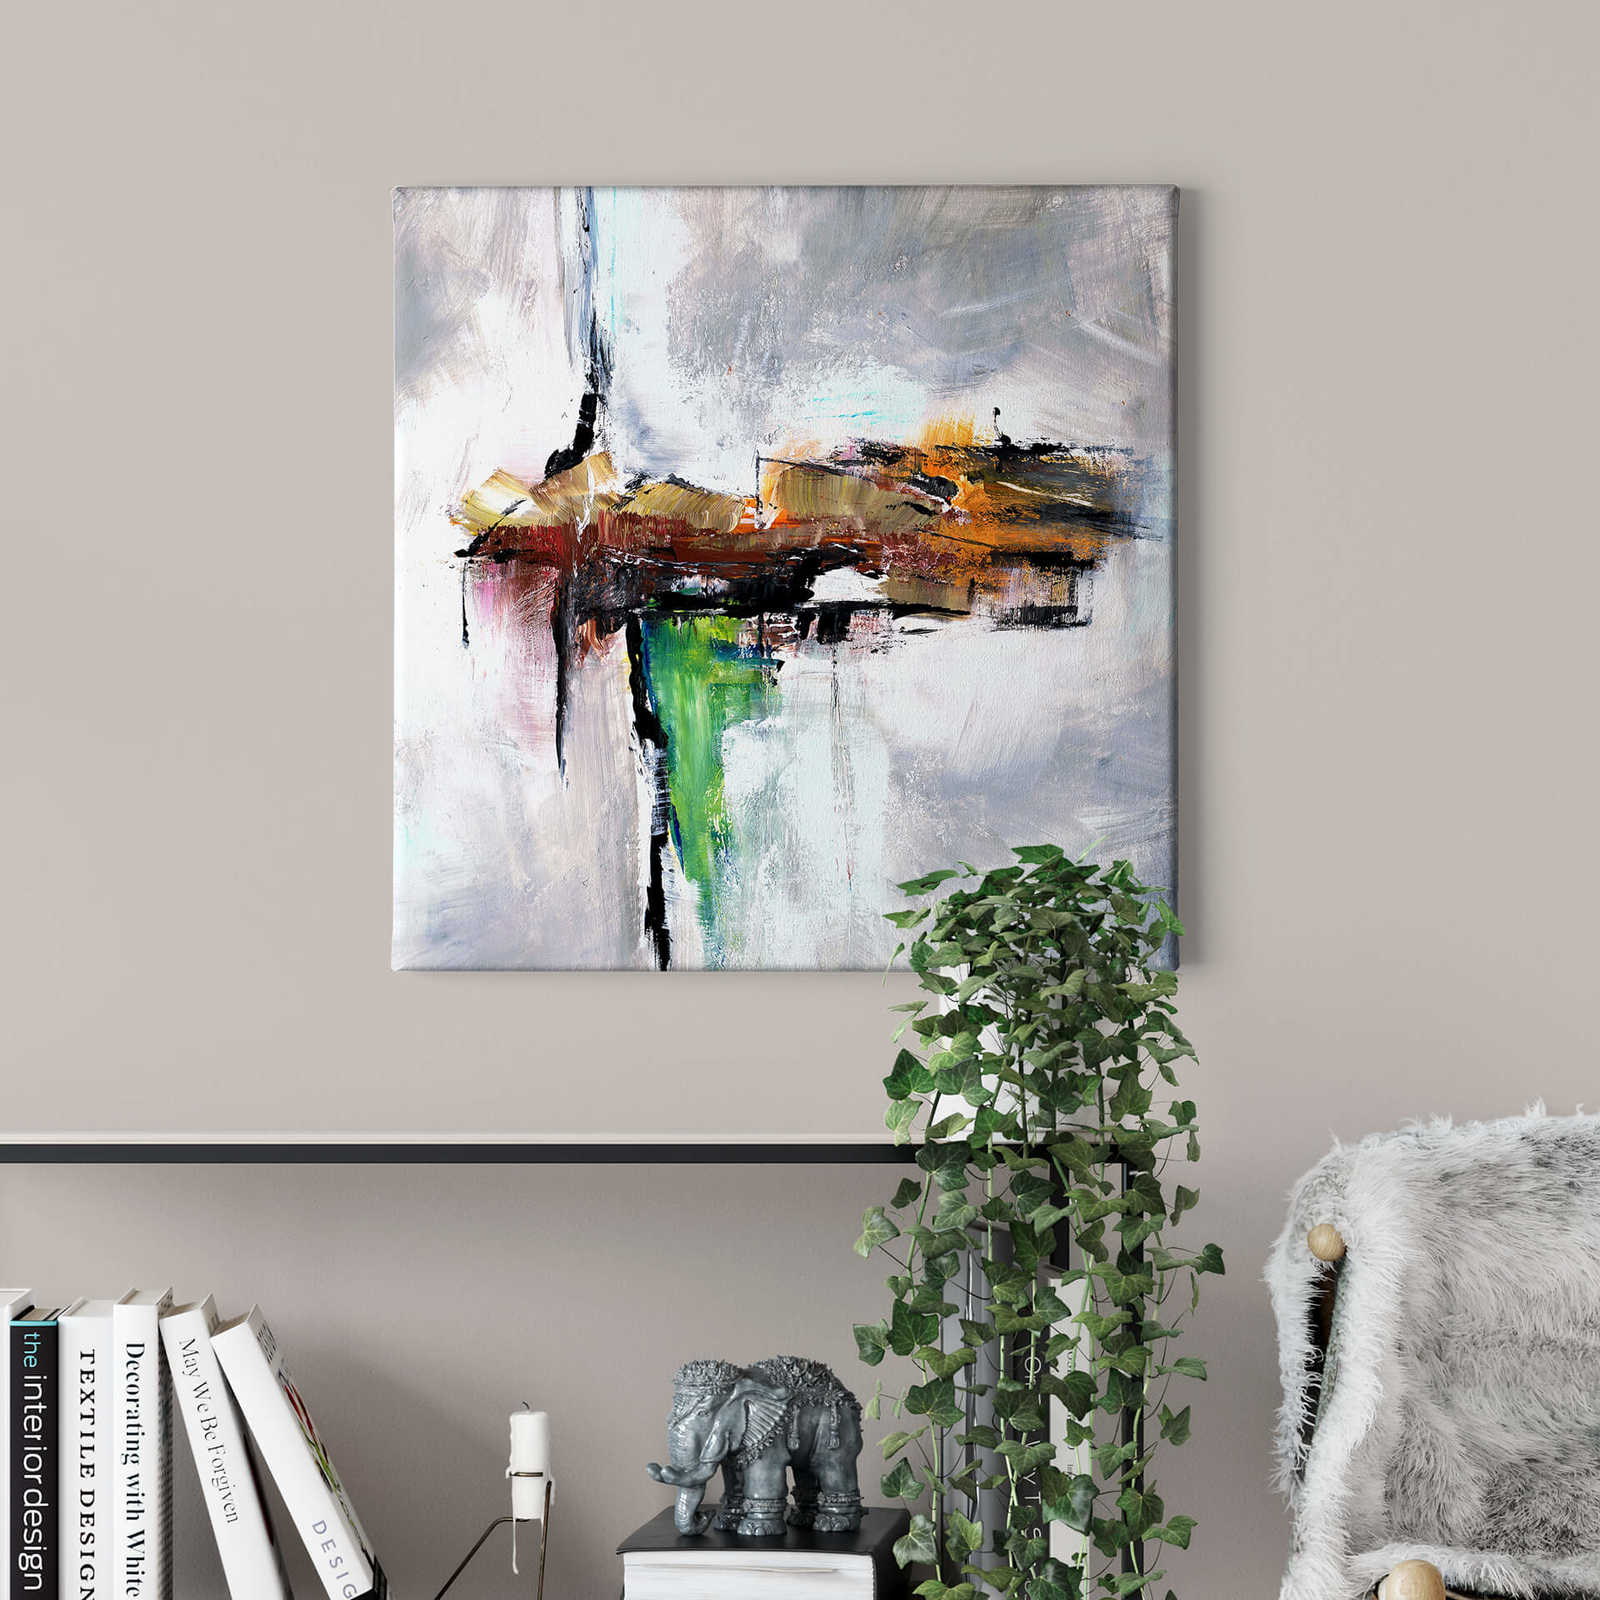             Square Canvas print abstract painting by Niksic
        